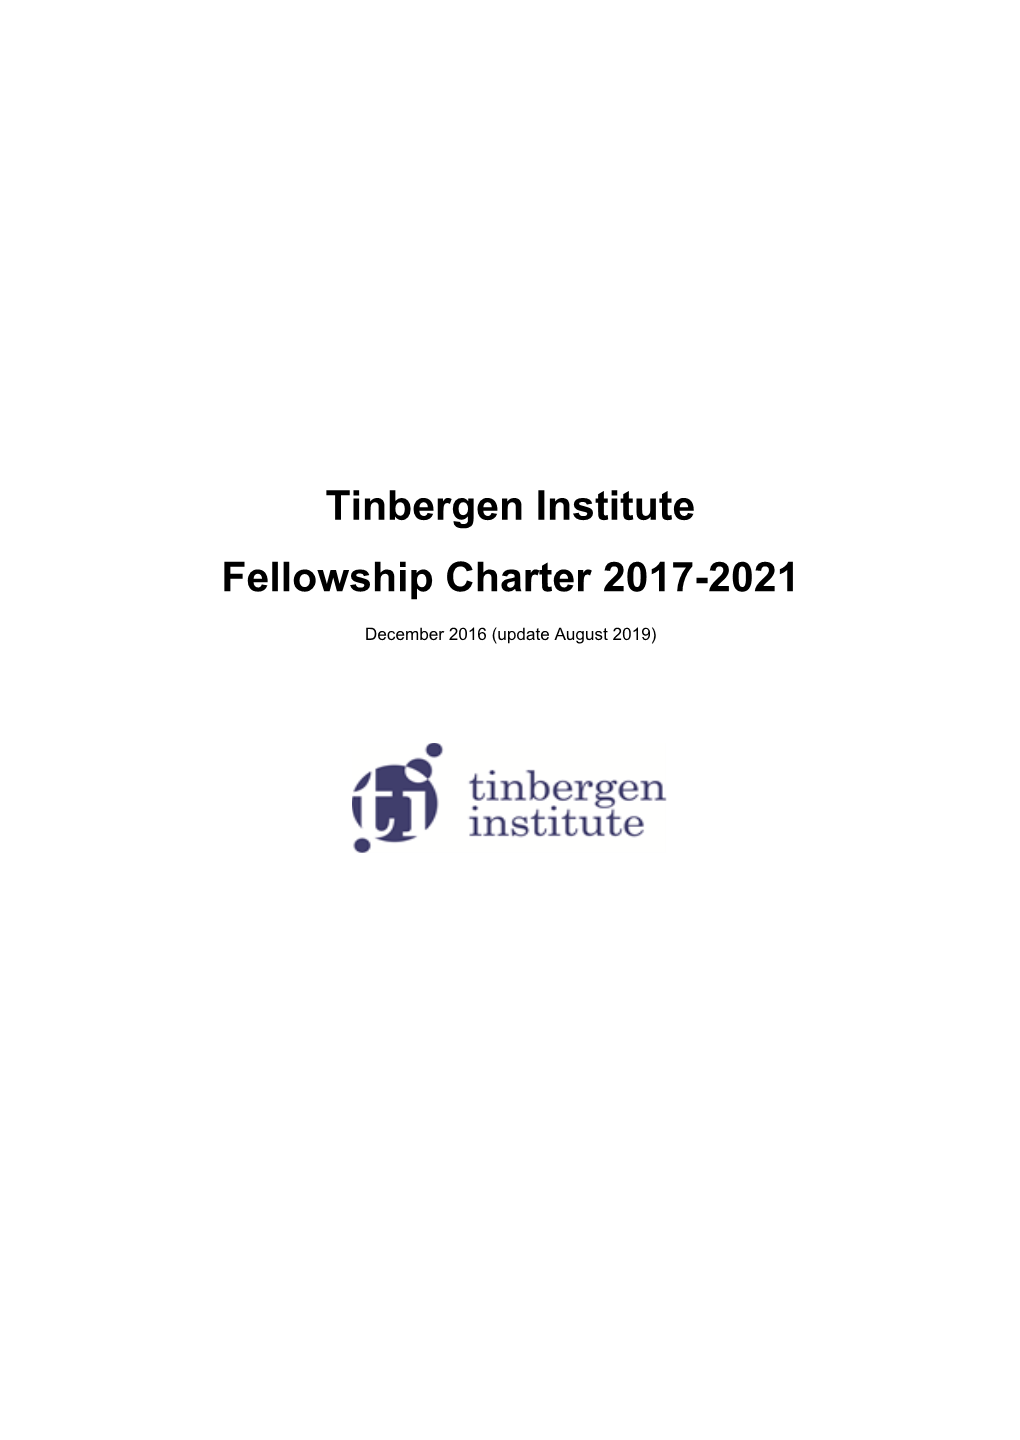 Fellowship Requirements and Charter 2017-2021